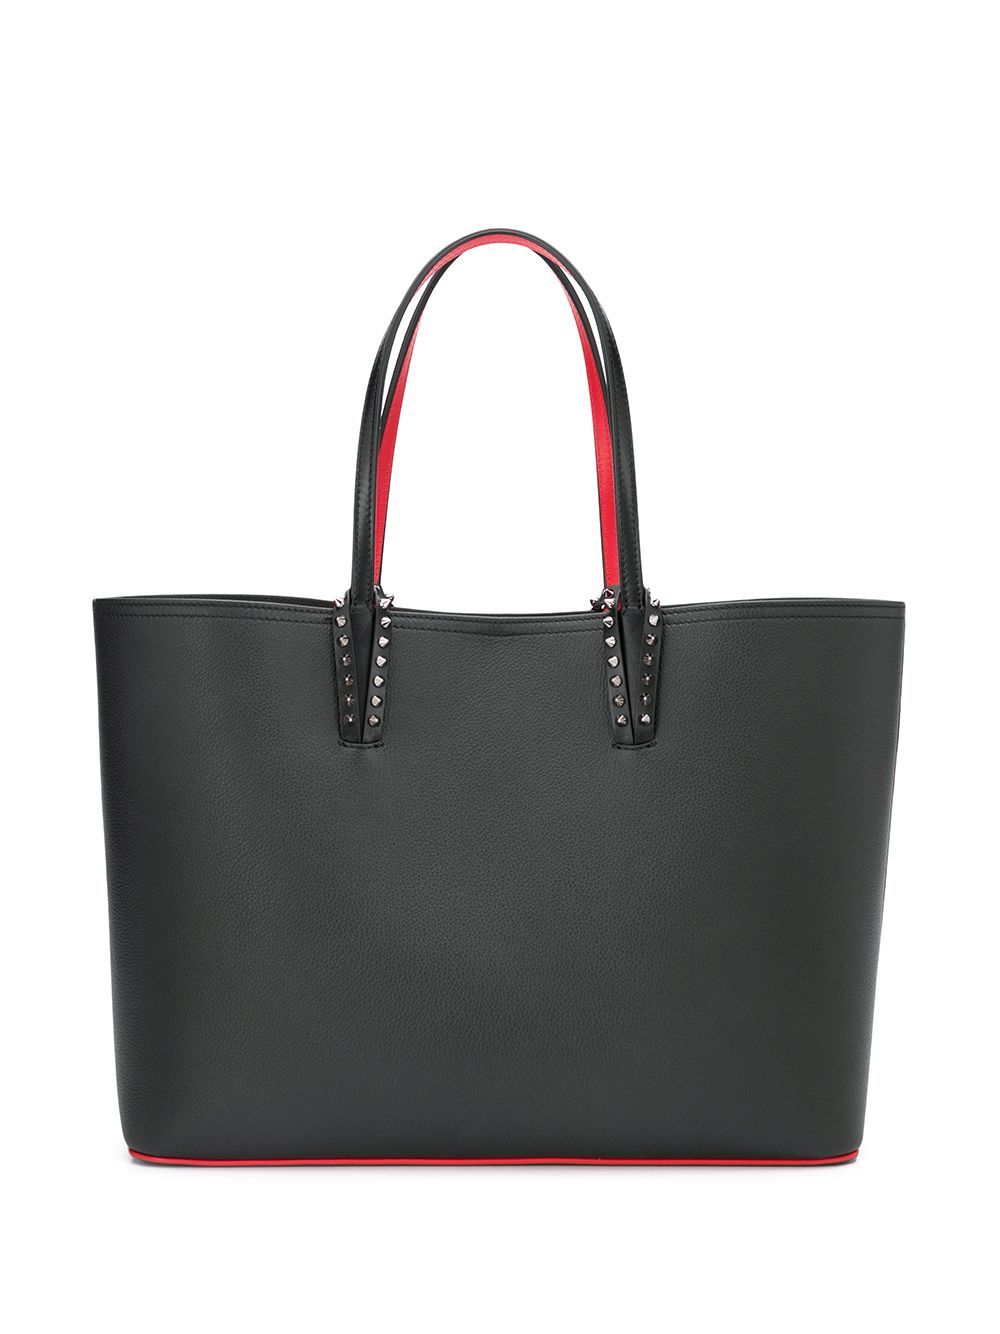 CHRISTIAN LOUBOUTIN TWO ROUNDED TOP HANDLES REMOVABLE Pouch Handbag